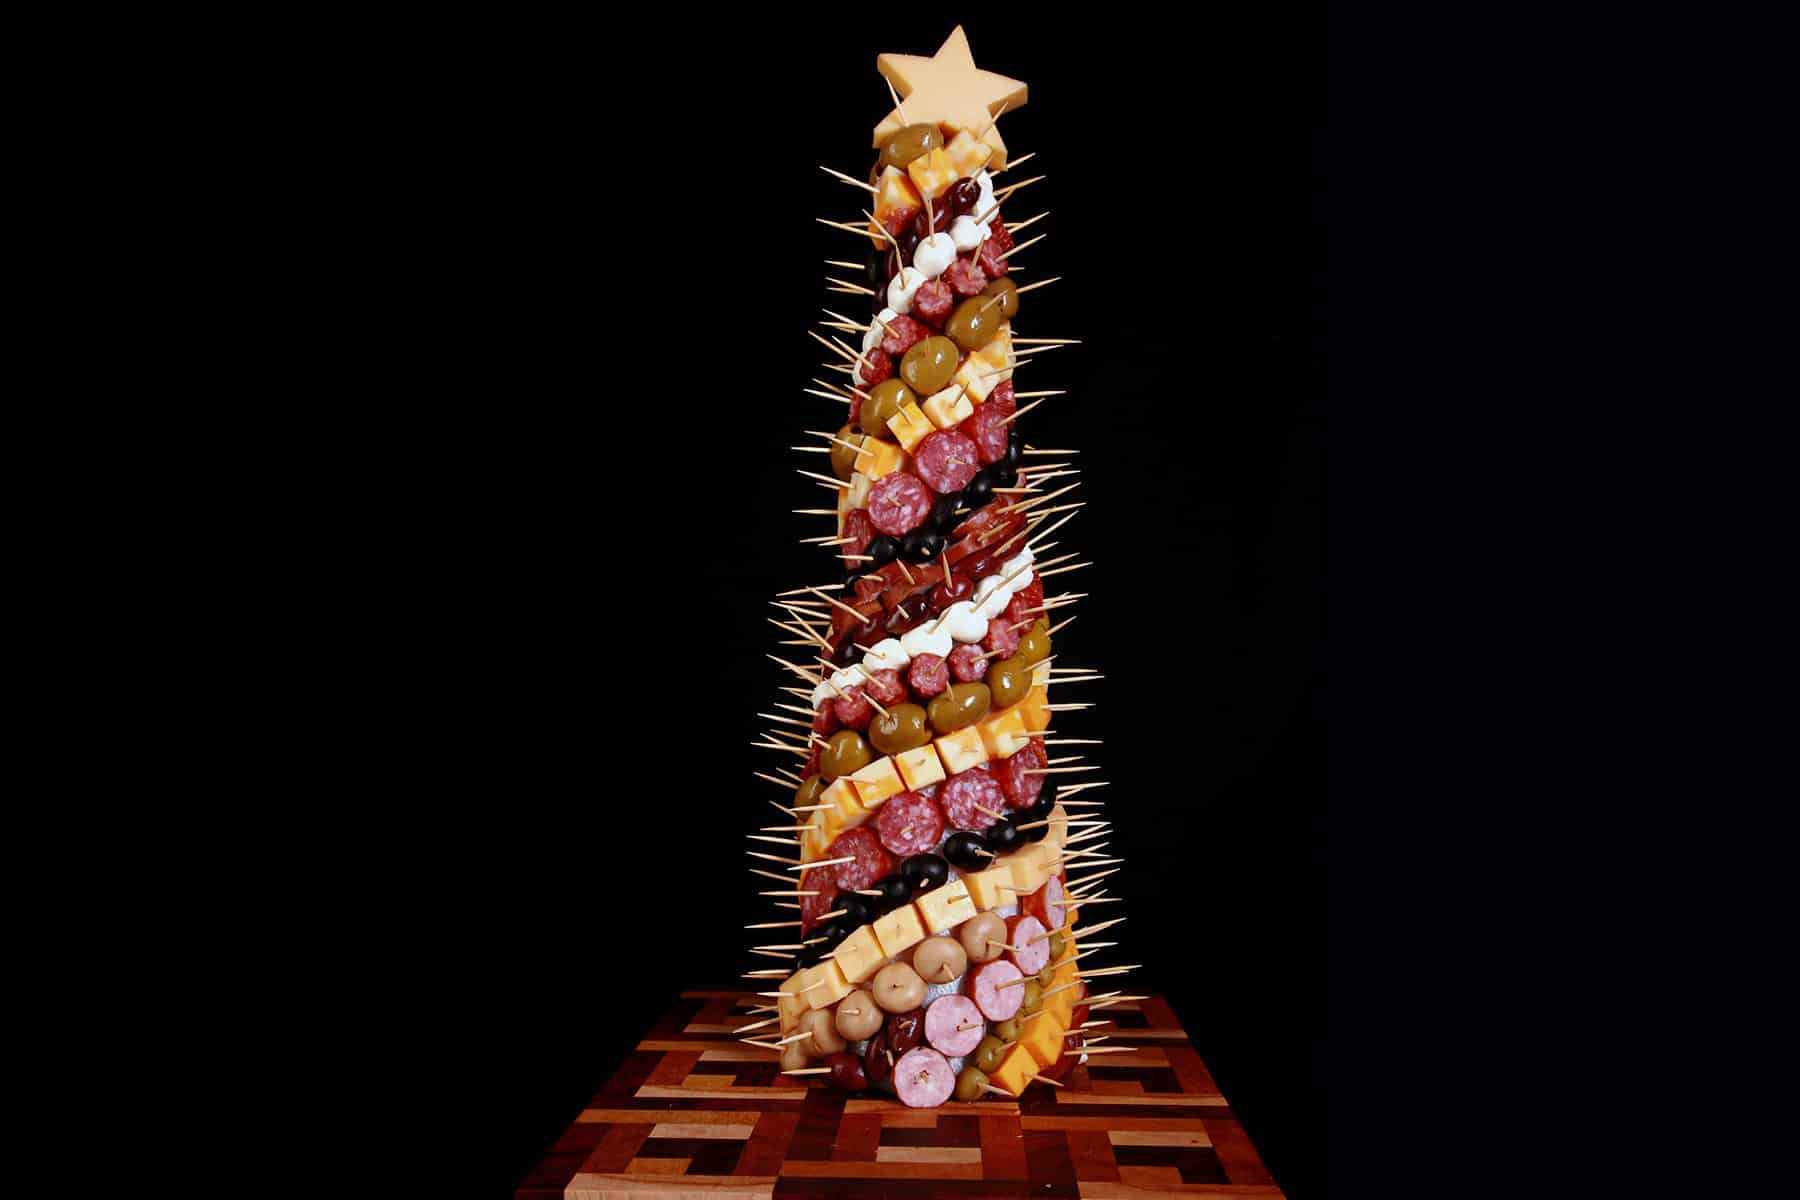 A charcuterie christmas tree, covered in cheese, olives, and cured meats.